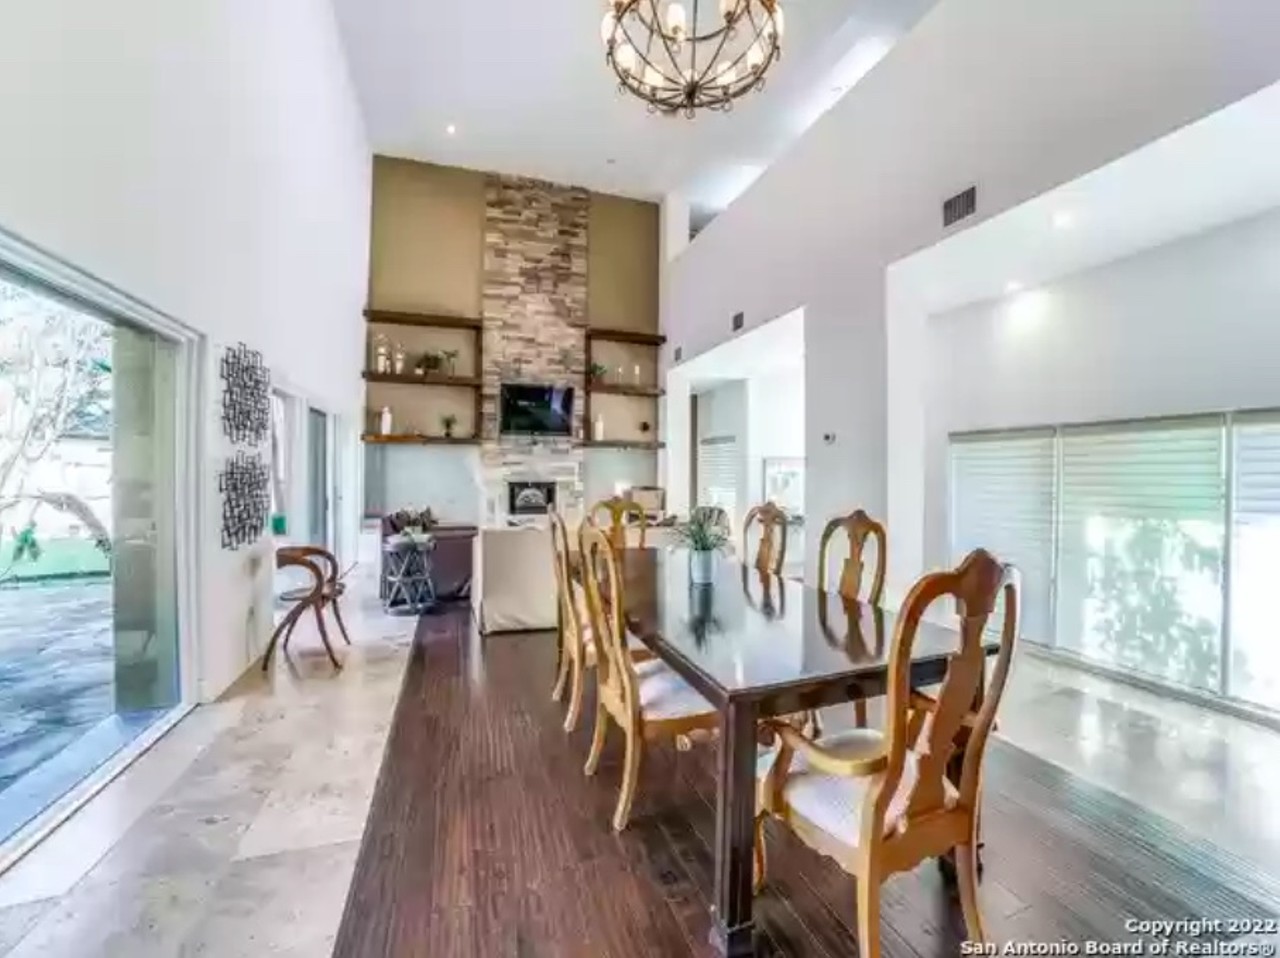 A home for sale in San Antonio's Dominion development features contemporary Mexican-style design